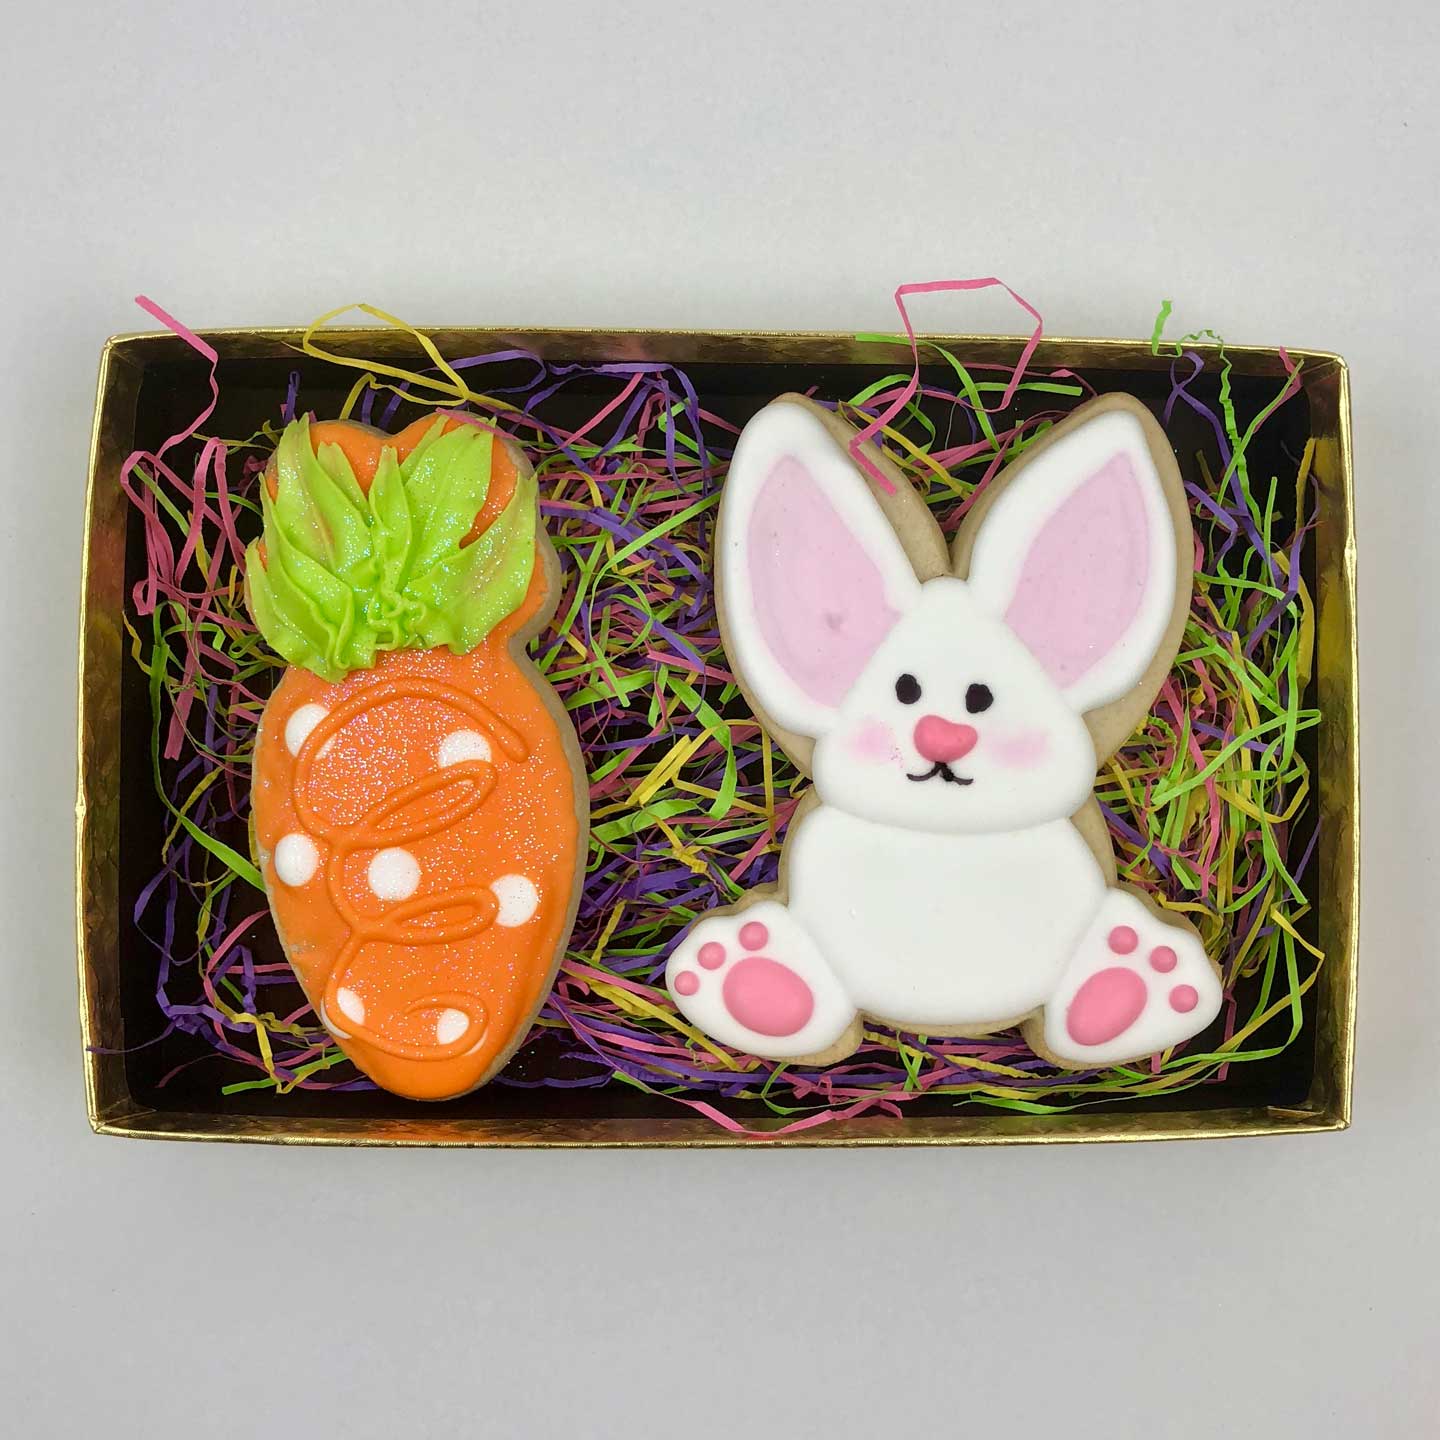 Bunny and Carrot Cookies in a box